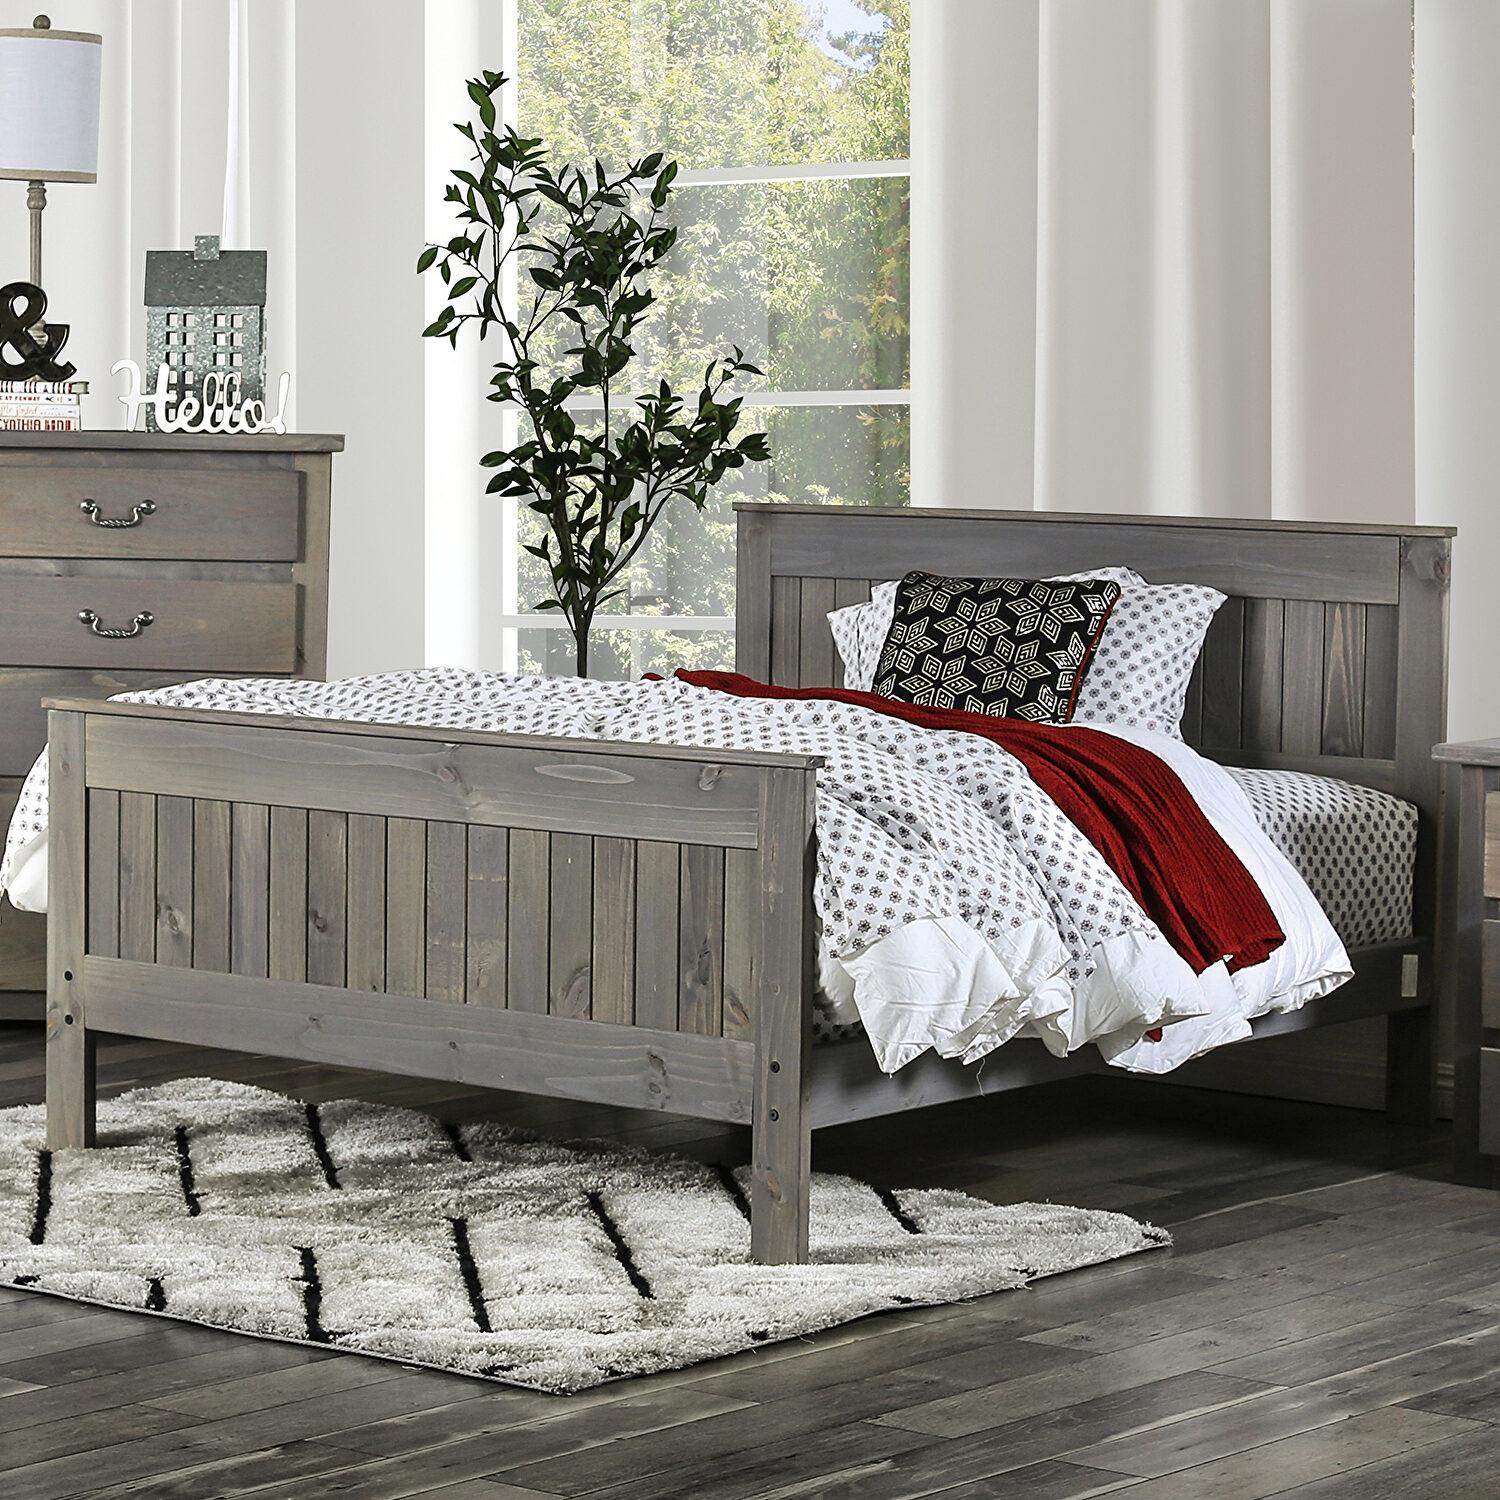 Rustic Panel Bed AM7973-F Rockwall AM7973-F in Gray 